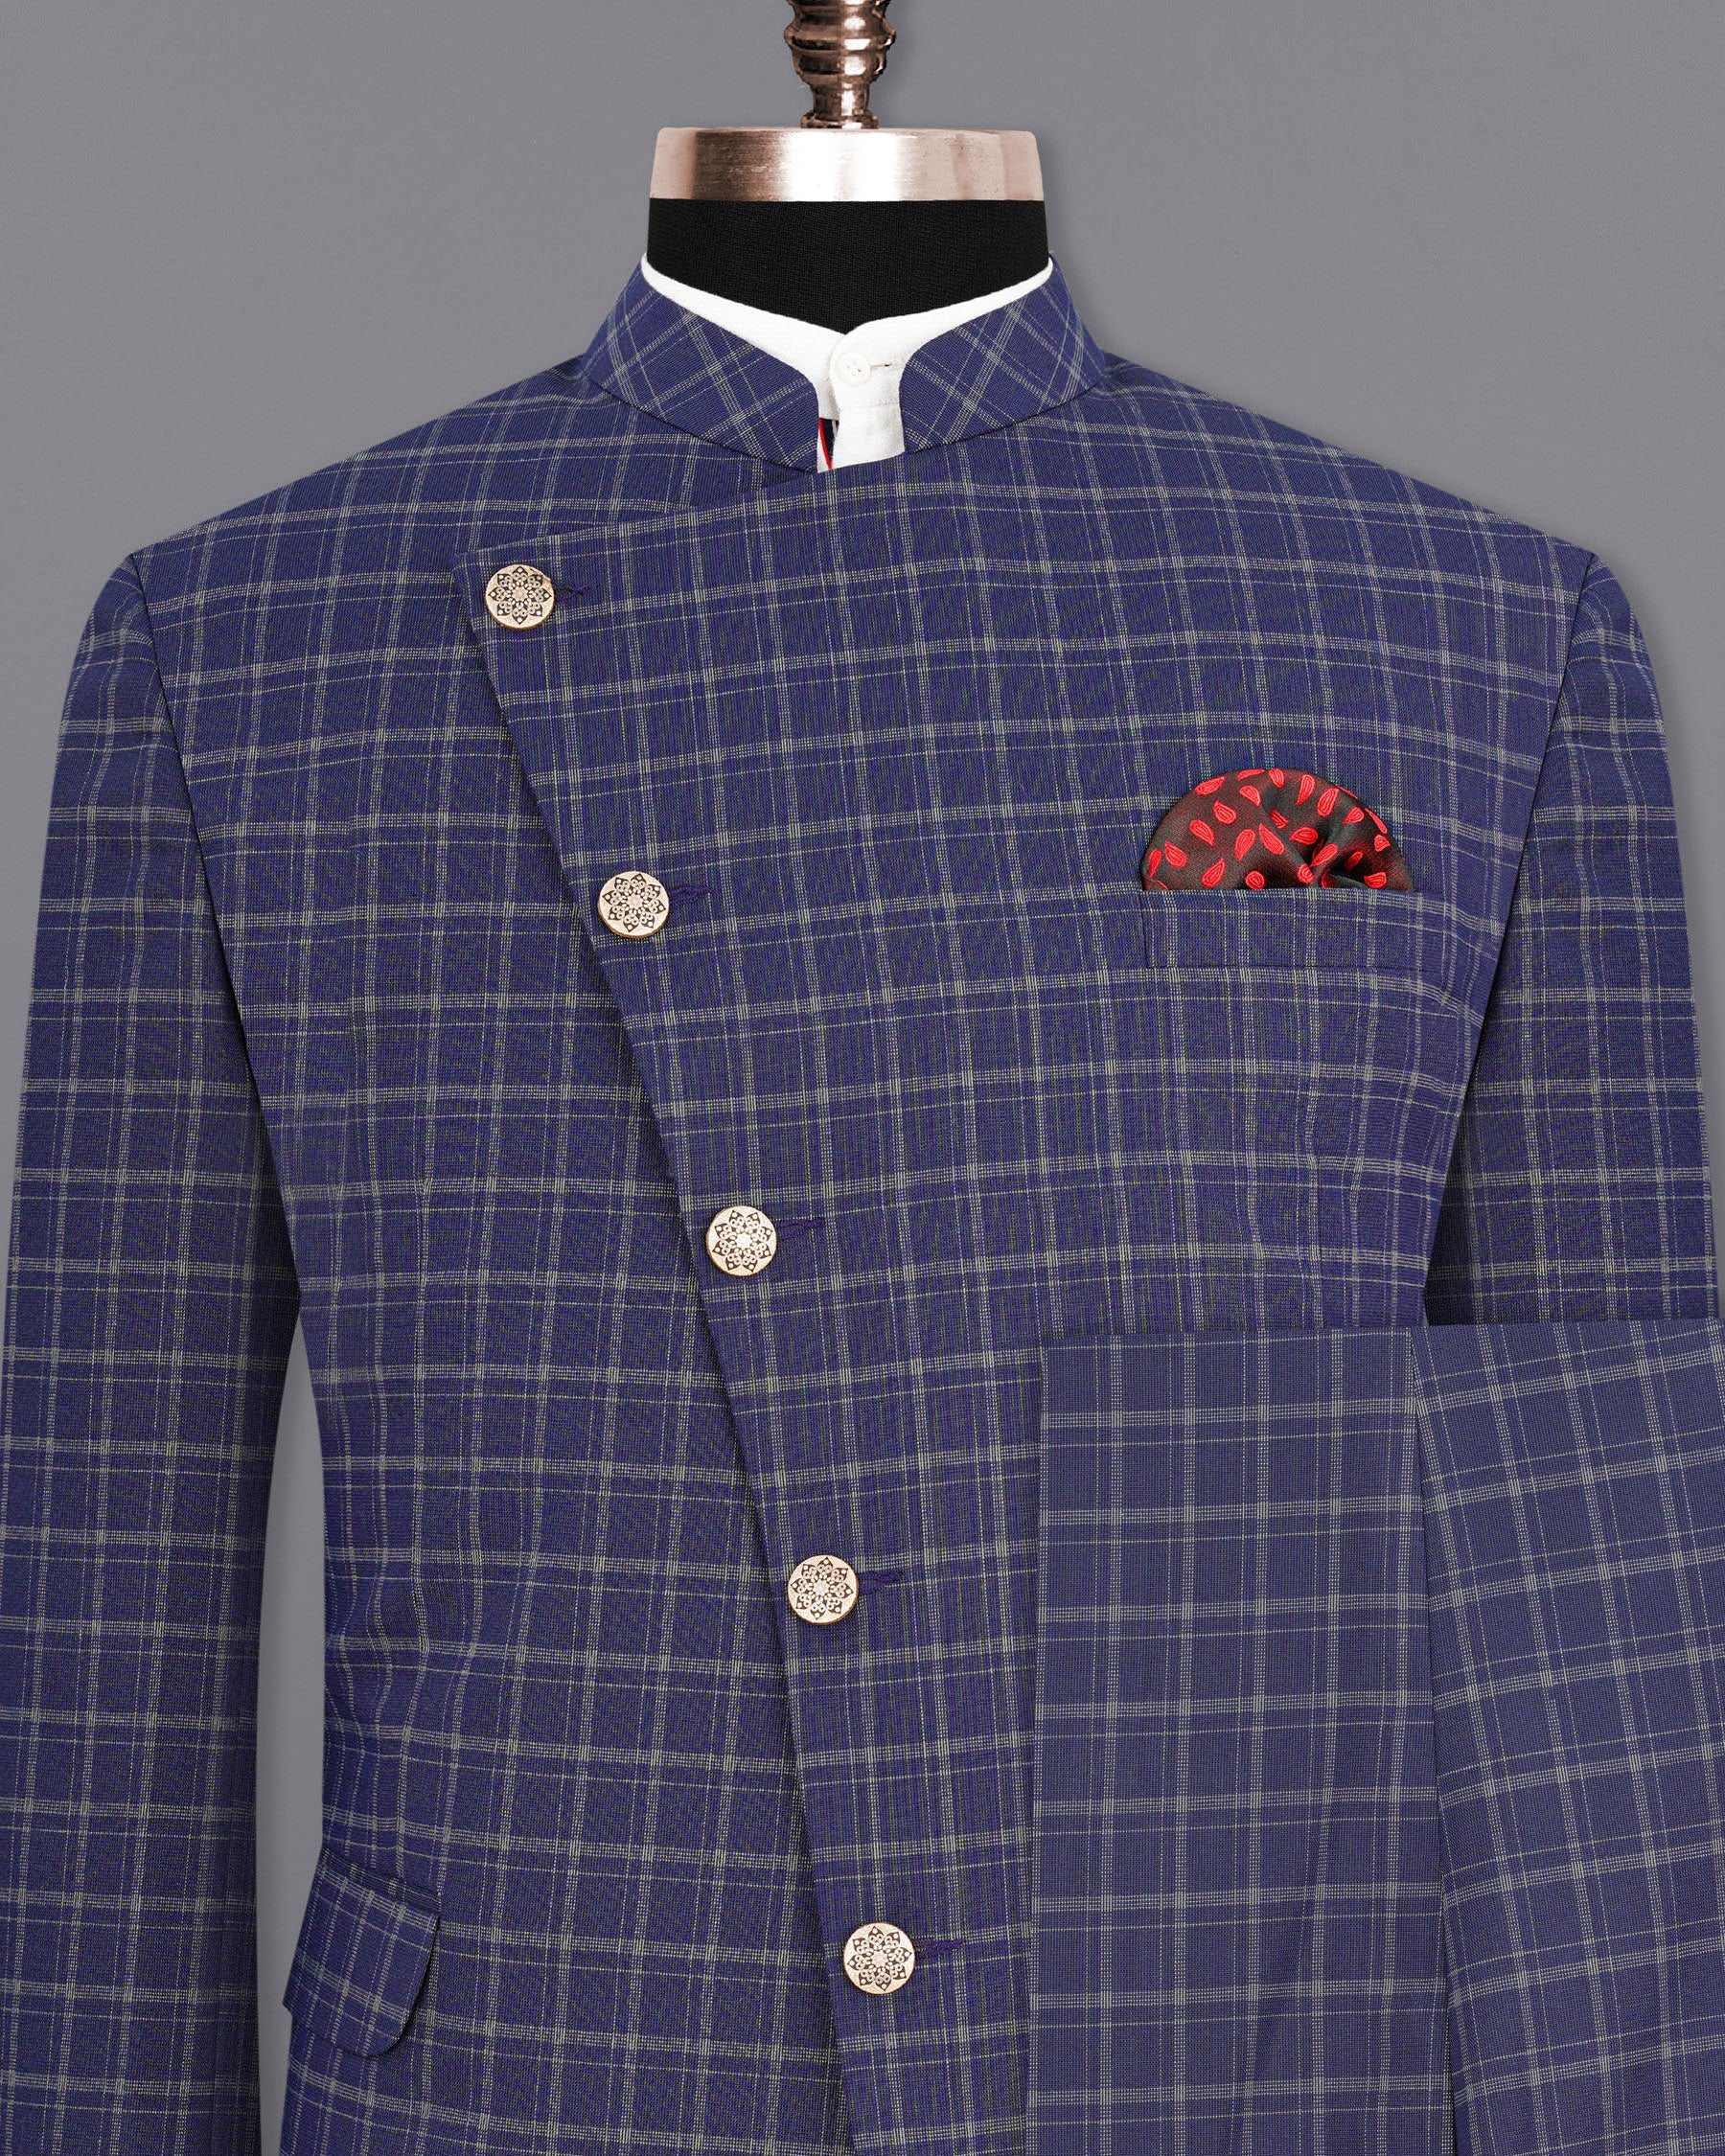 Mulled Wine Blue With Casper Gray Checkered Cross Placket Bandhgala Suit